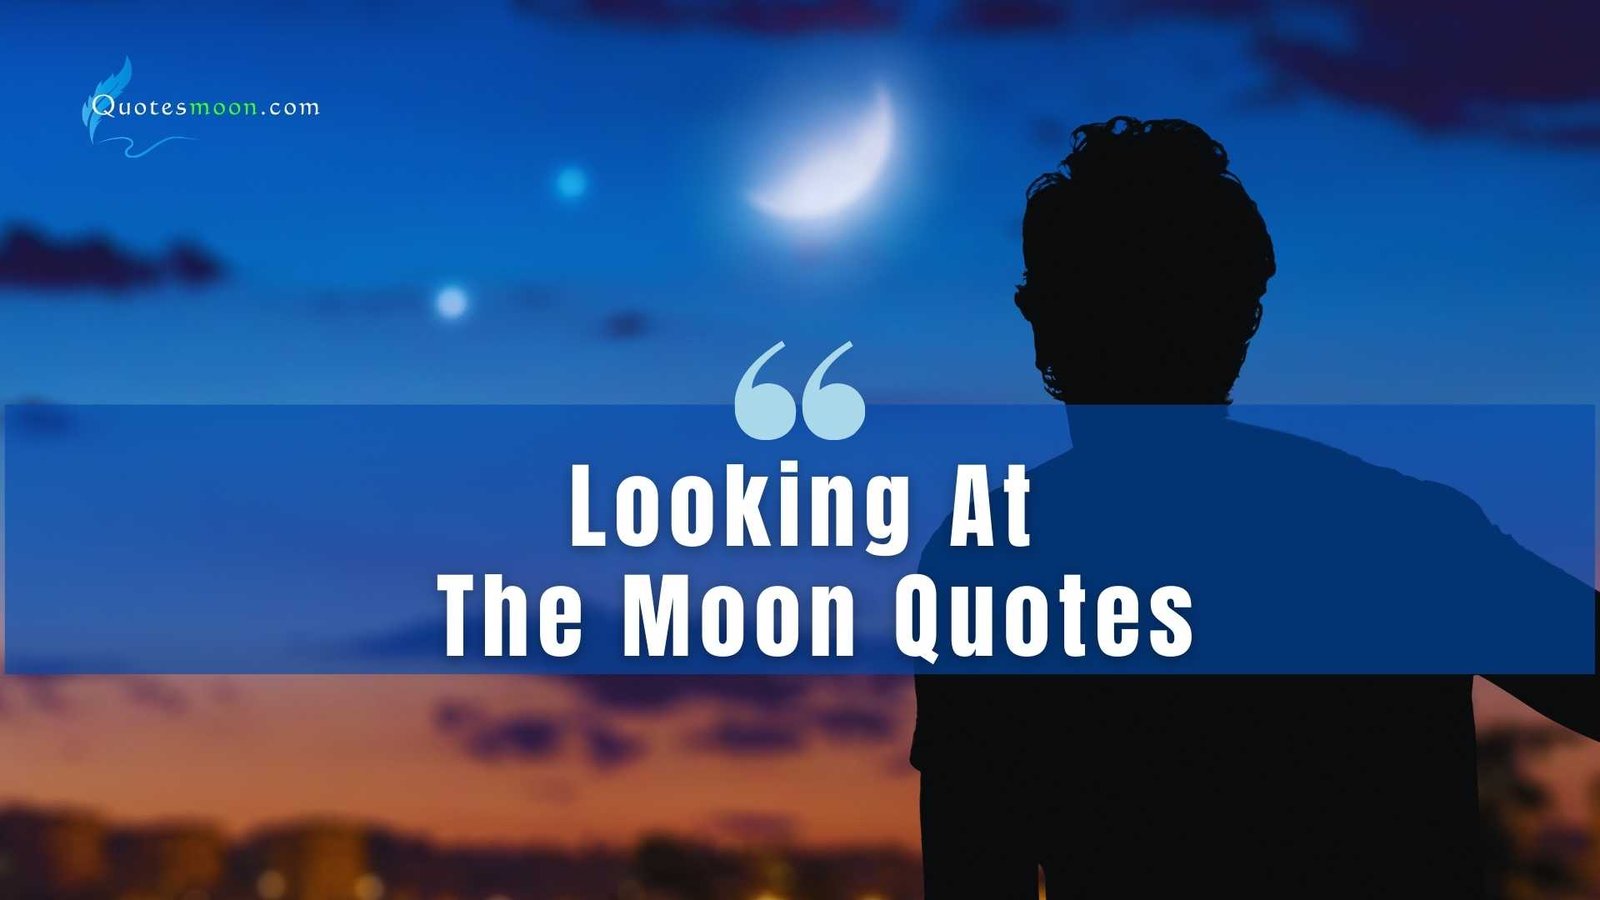 Looking At The Moon Quotes For Instagram